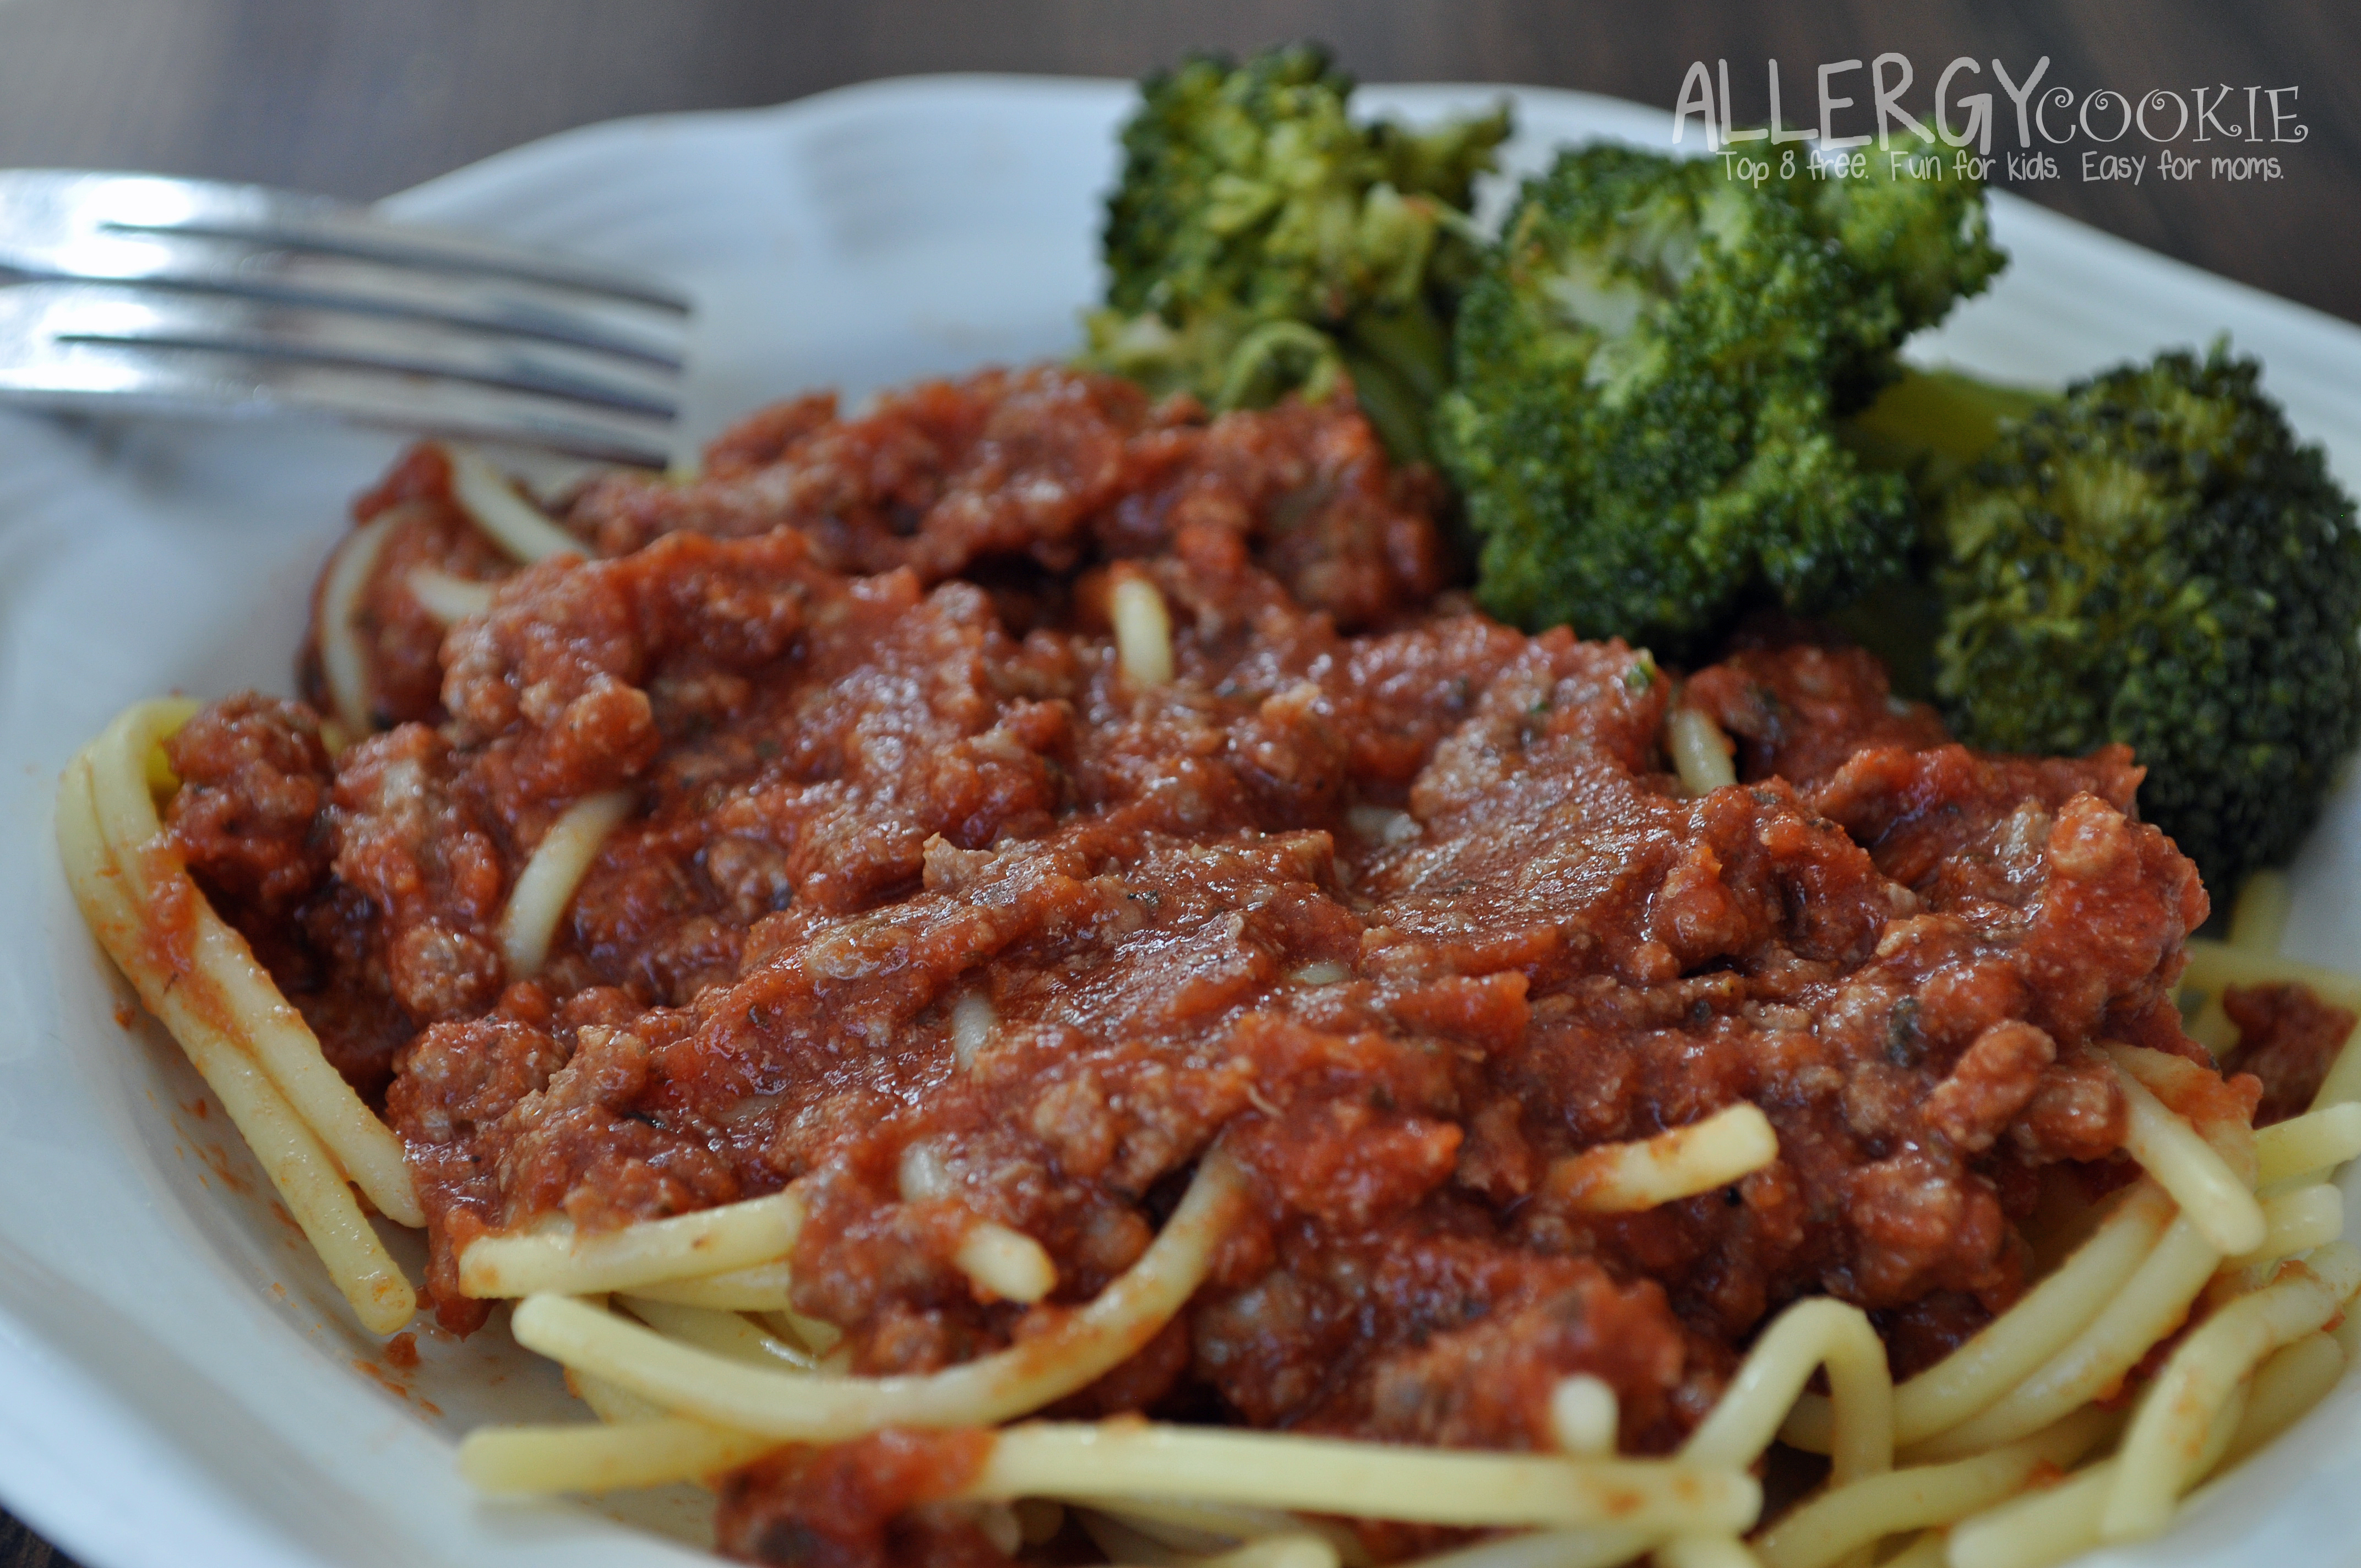 Old Fashioned Spaghetti Sauce (top 8 free, gluten free, soy free)